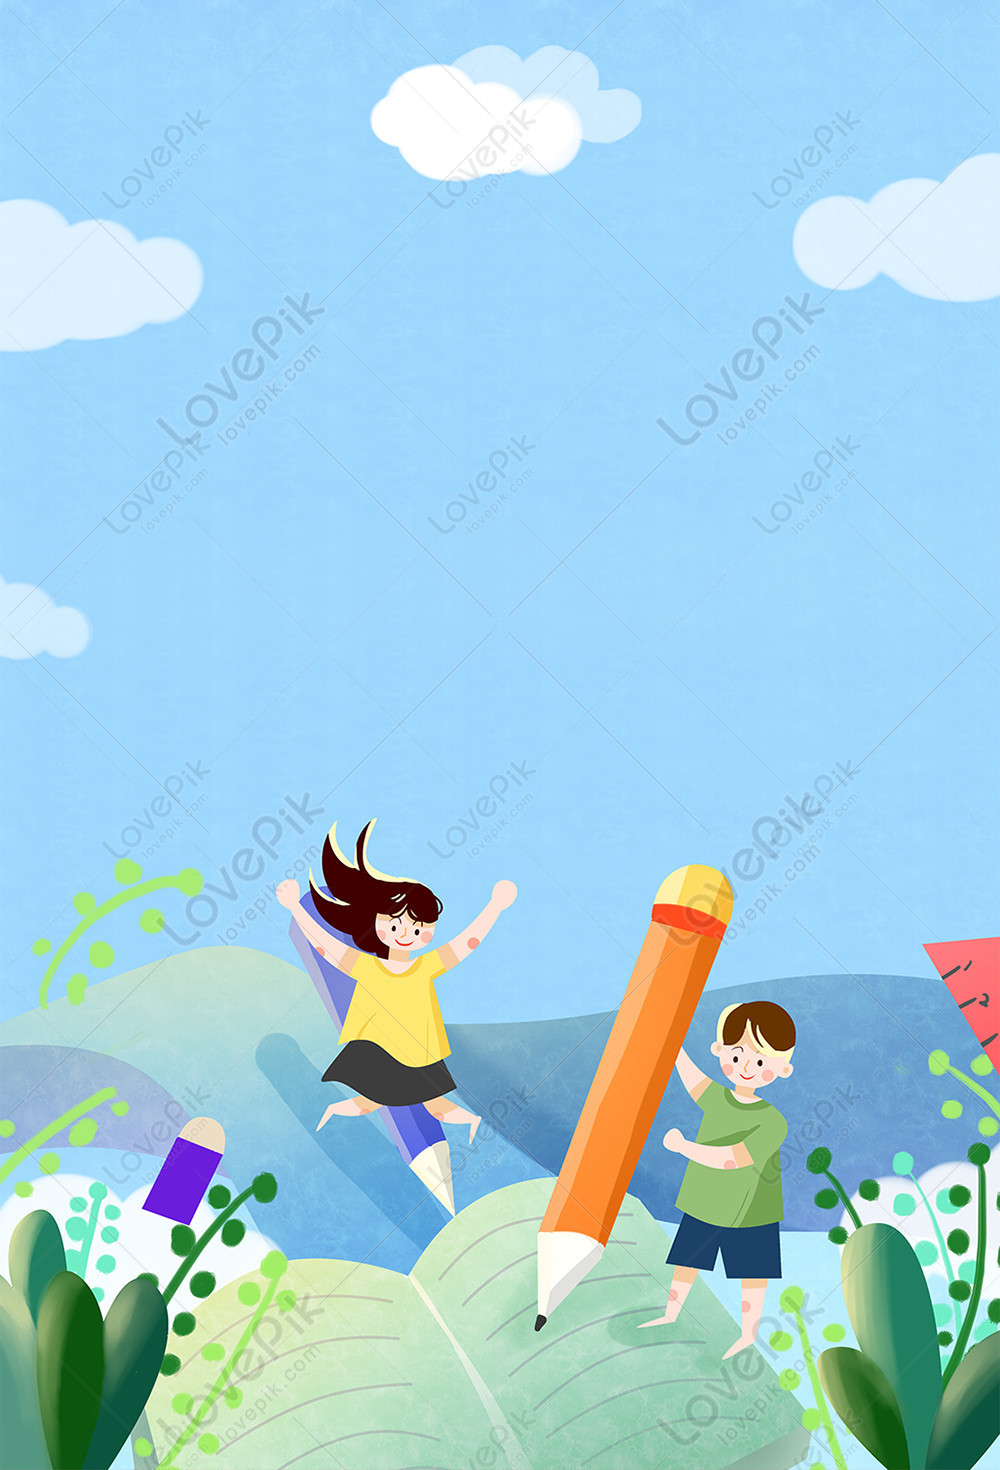 School Poster Background Download Free | Poster Background Image on Lovepik  | 401615328